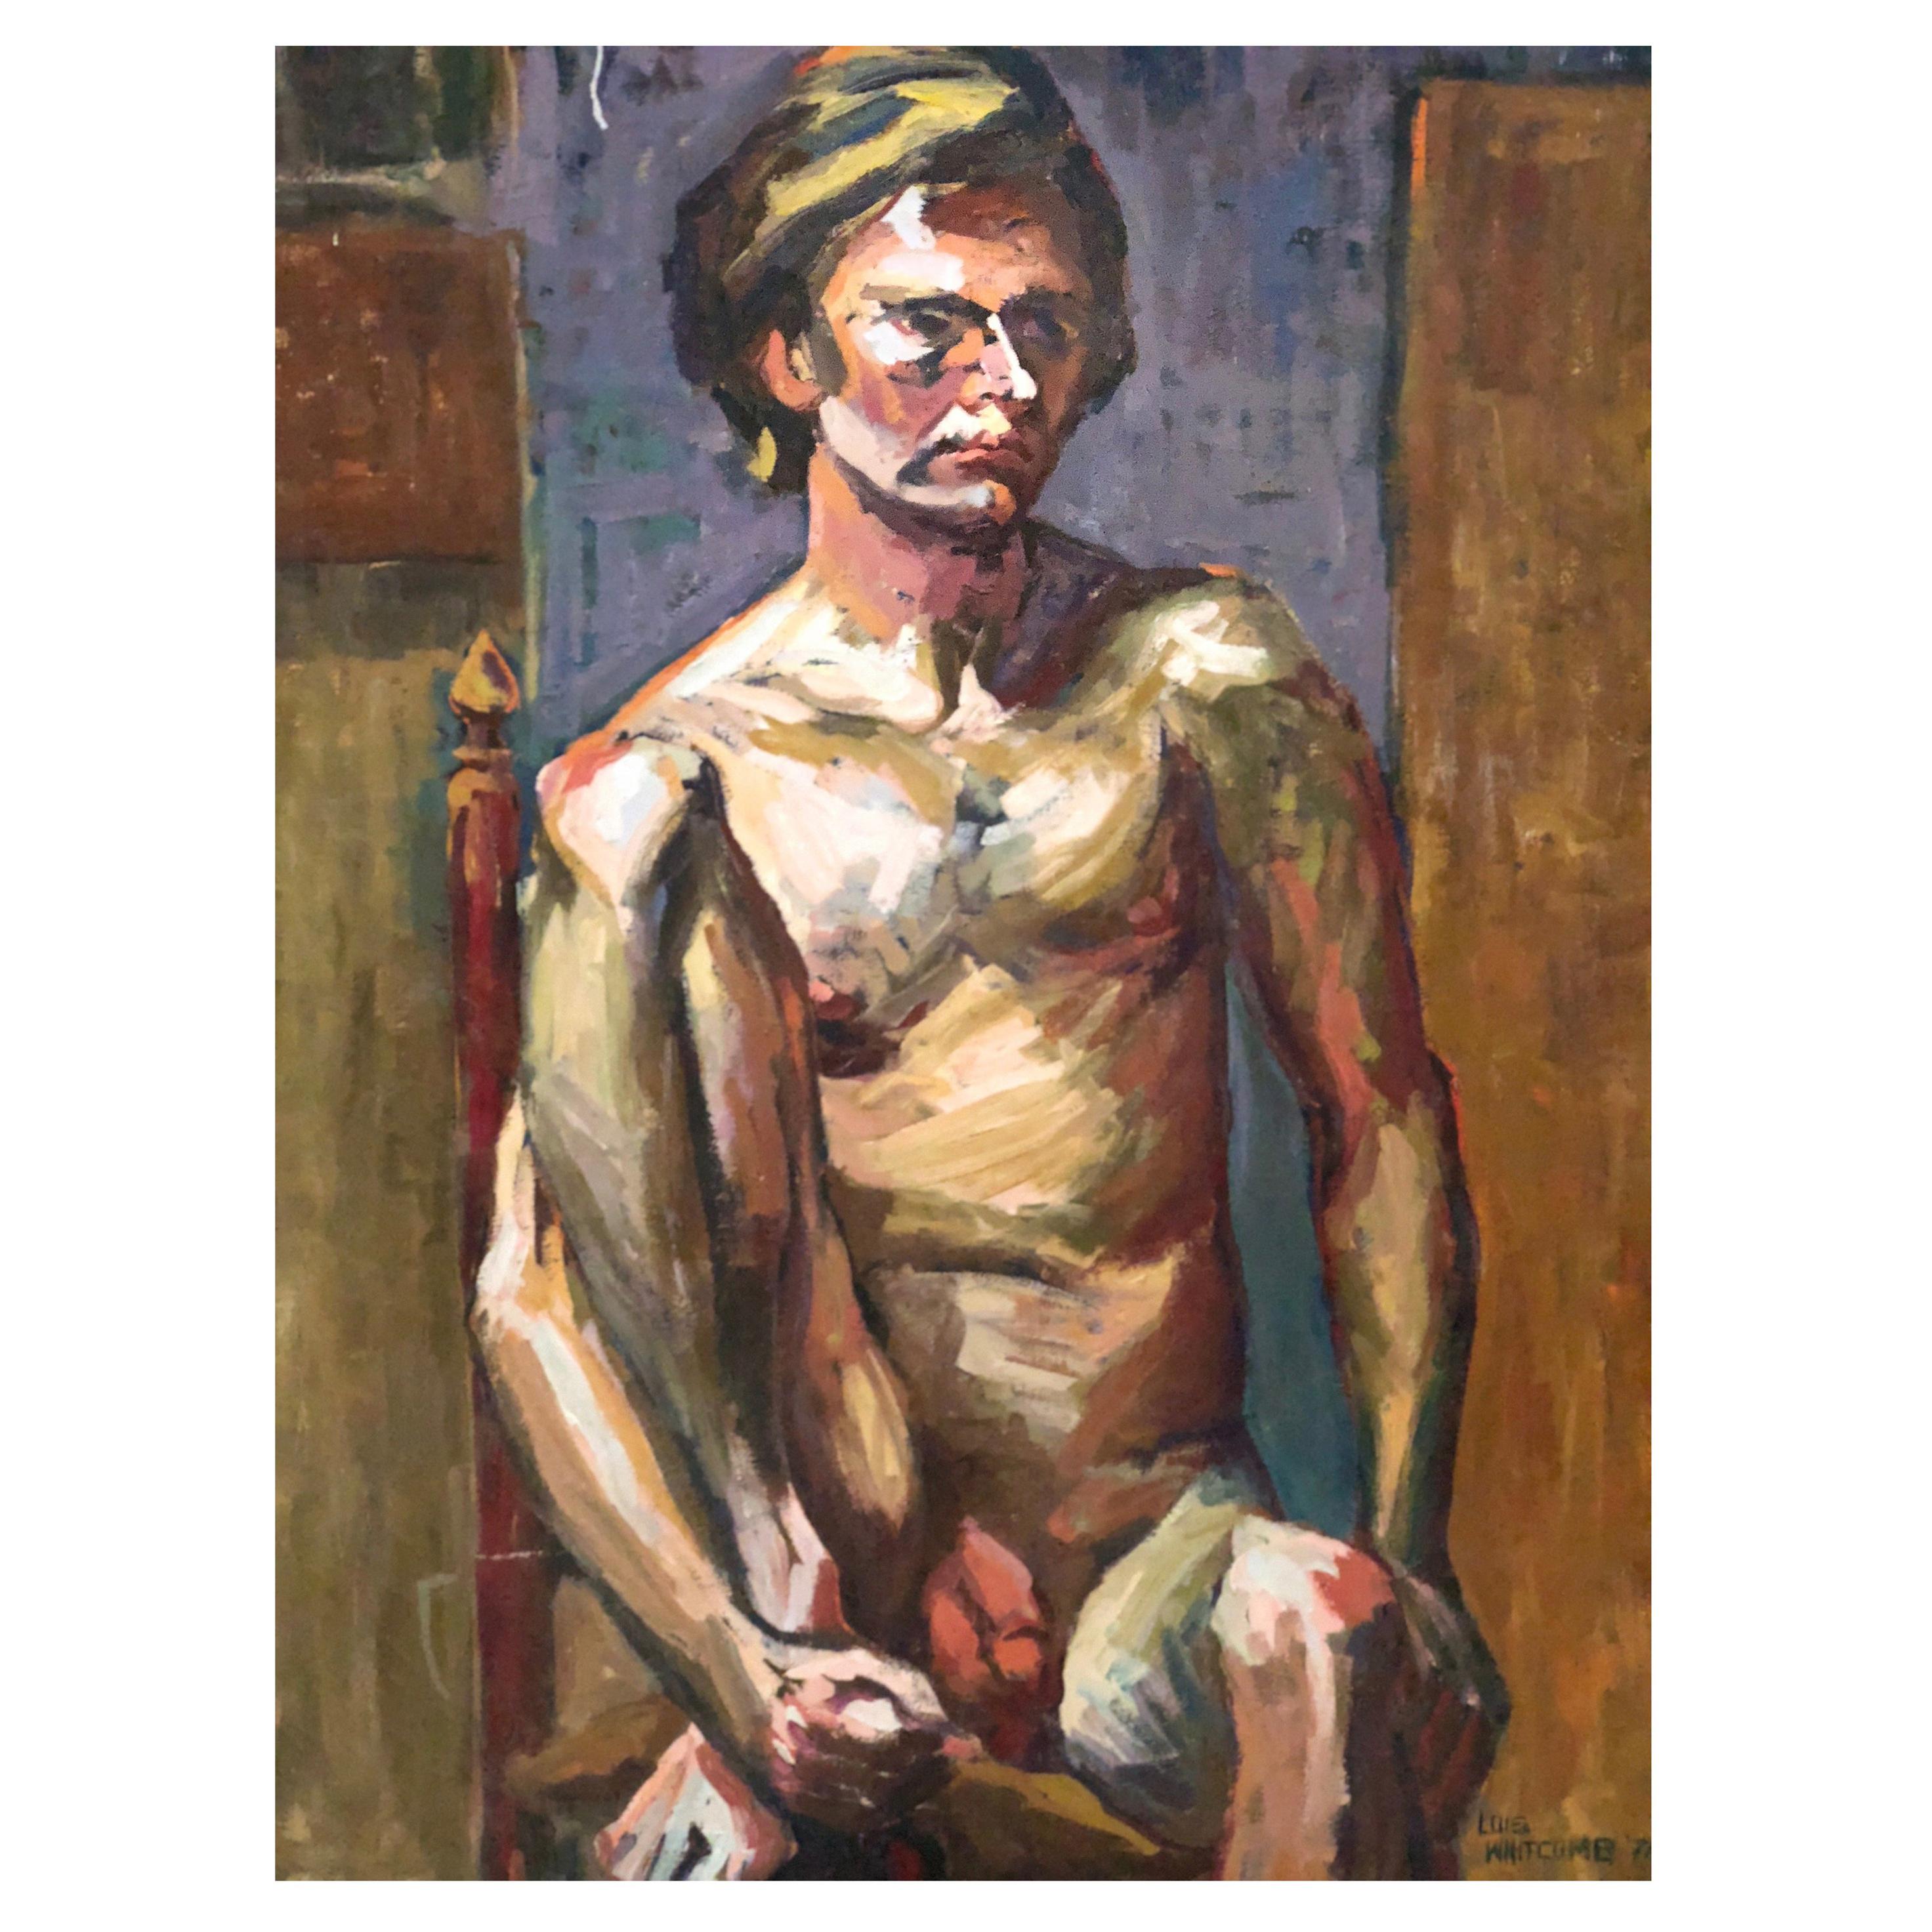 Midcentury Abstract Expressionist Male Nude Portrait by Lois Foley Whitcomb